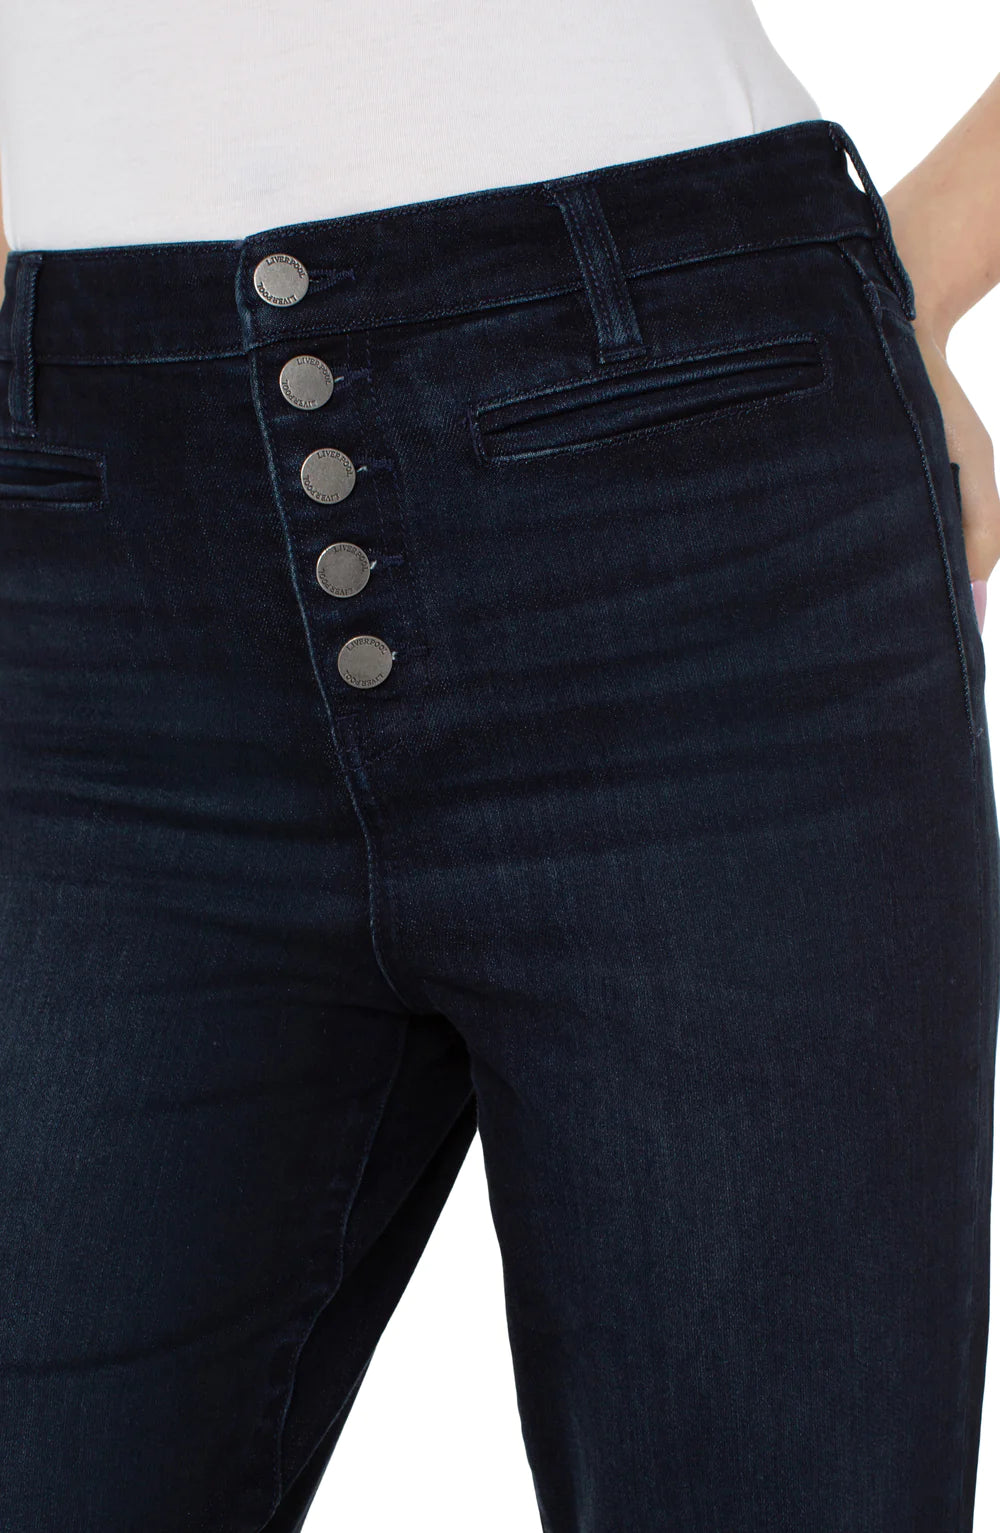 KENNEDY CROP HI-RISE WITH EXPOSED BUTTON FLY